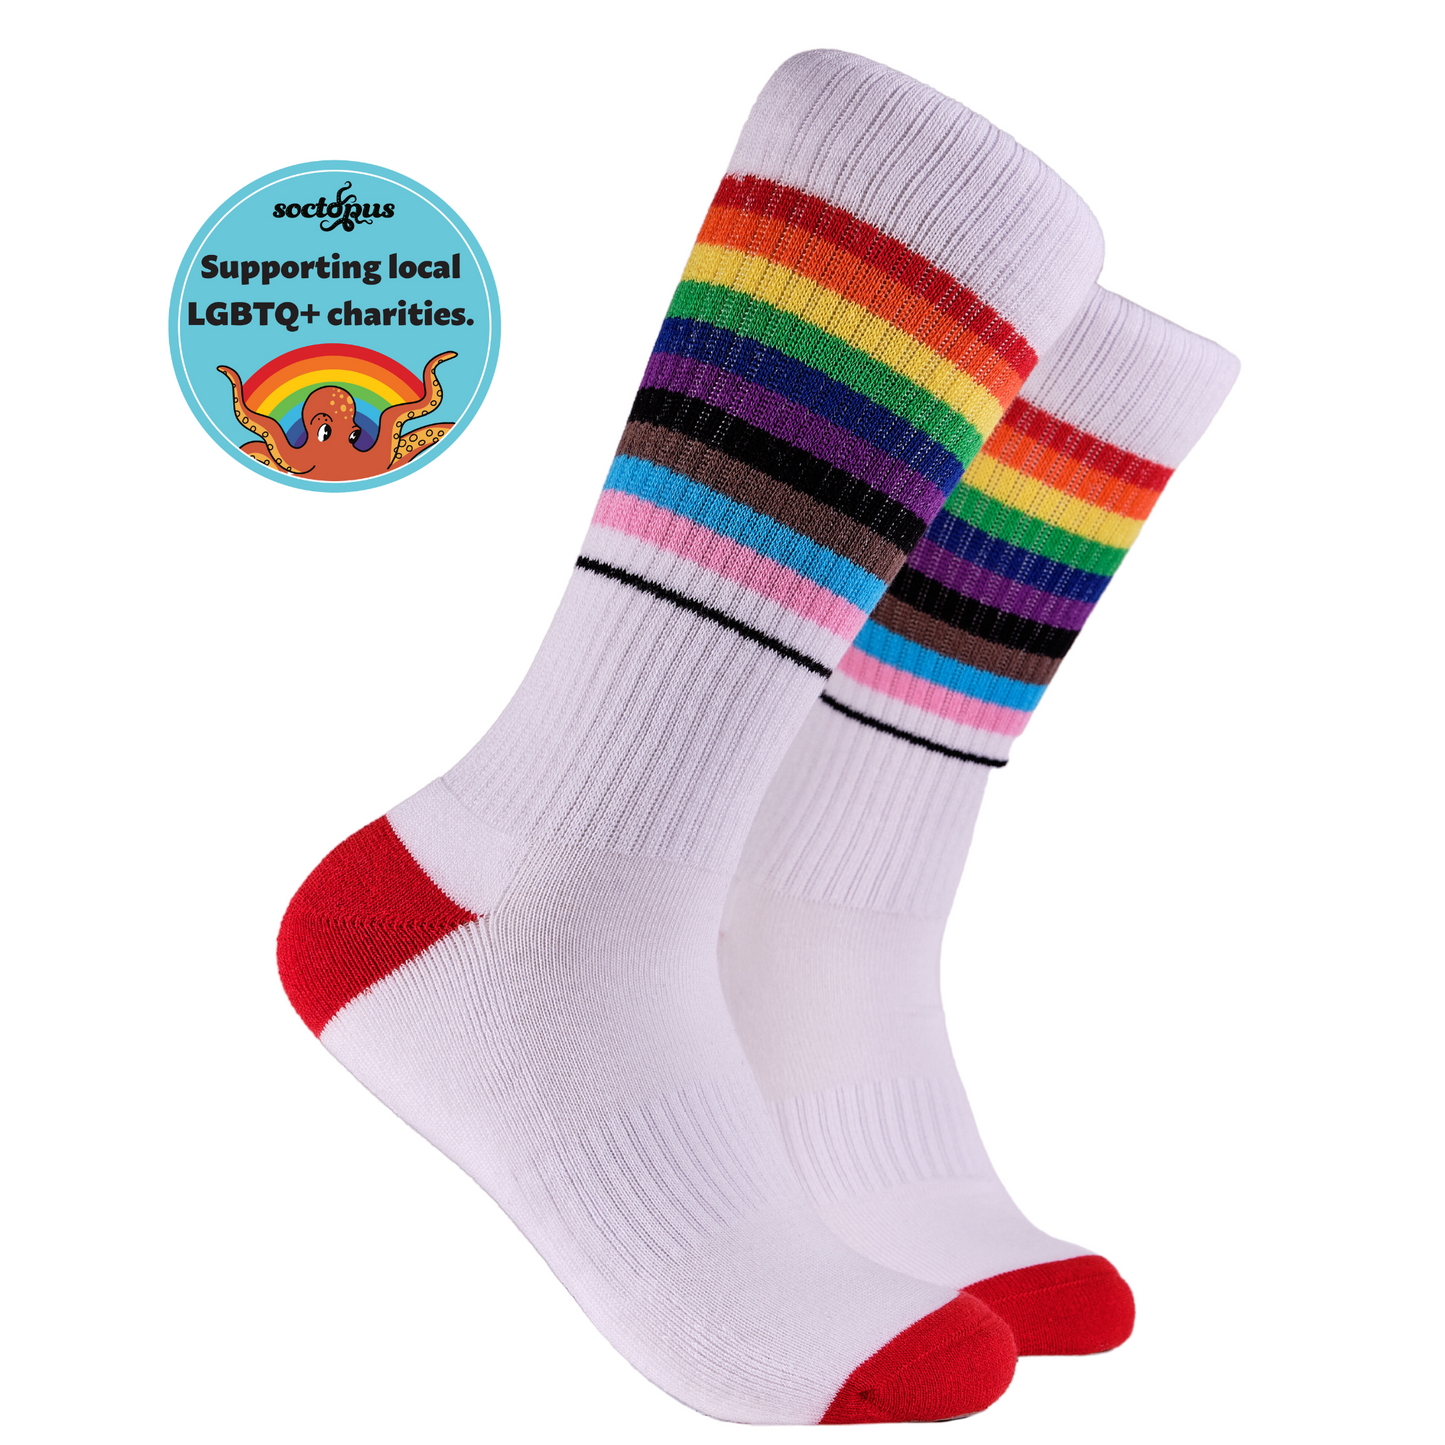 LGBTQA+ Socks - Pride Athletic. A pair of socks depicting the pride flag. White legs, white cuff, red heel and toe.